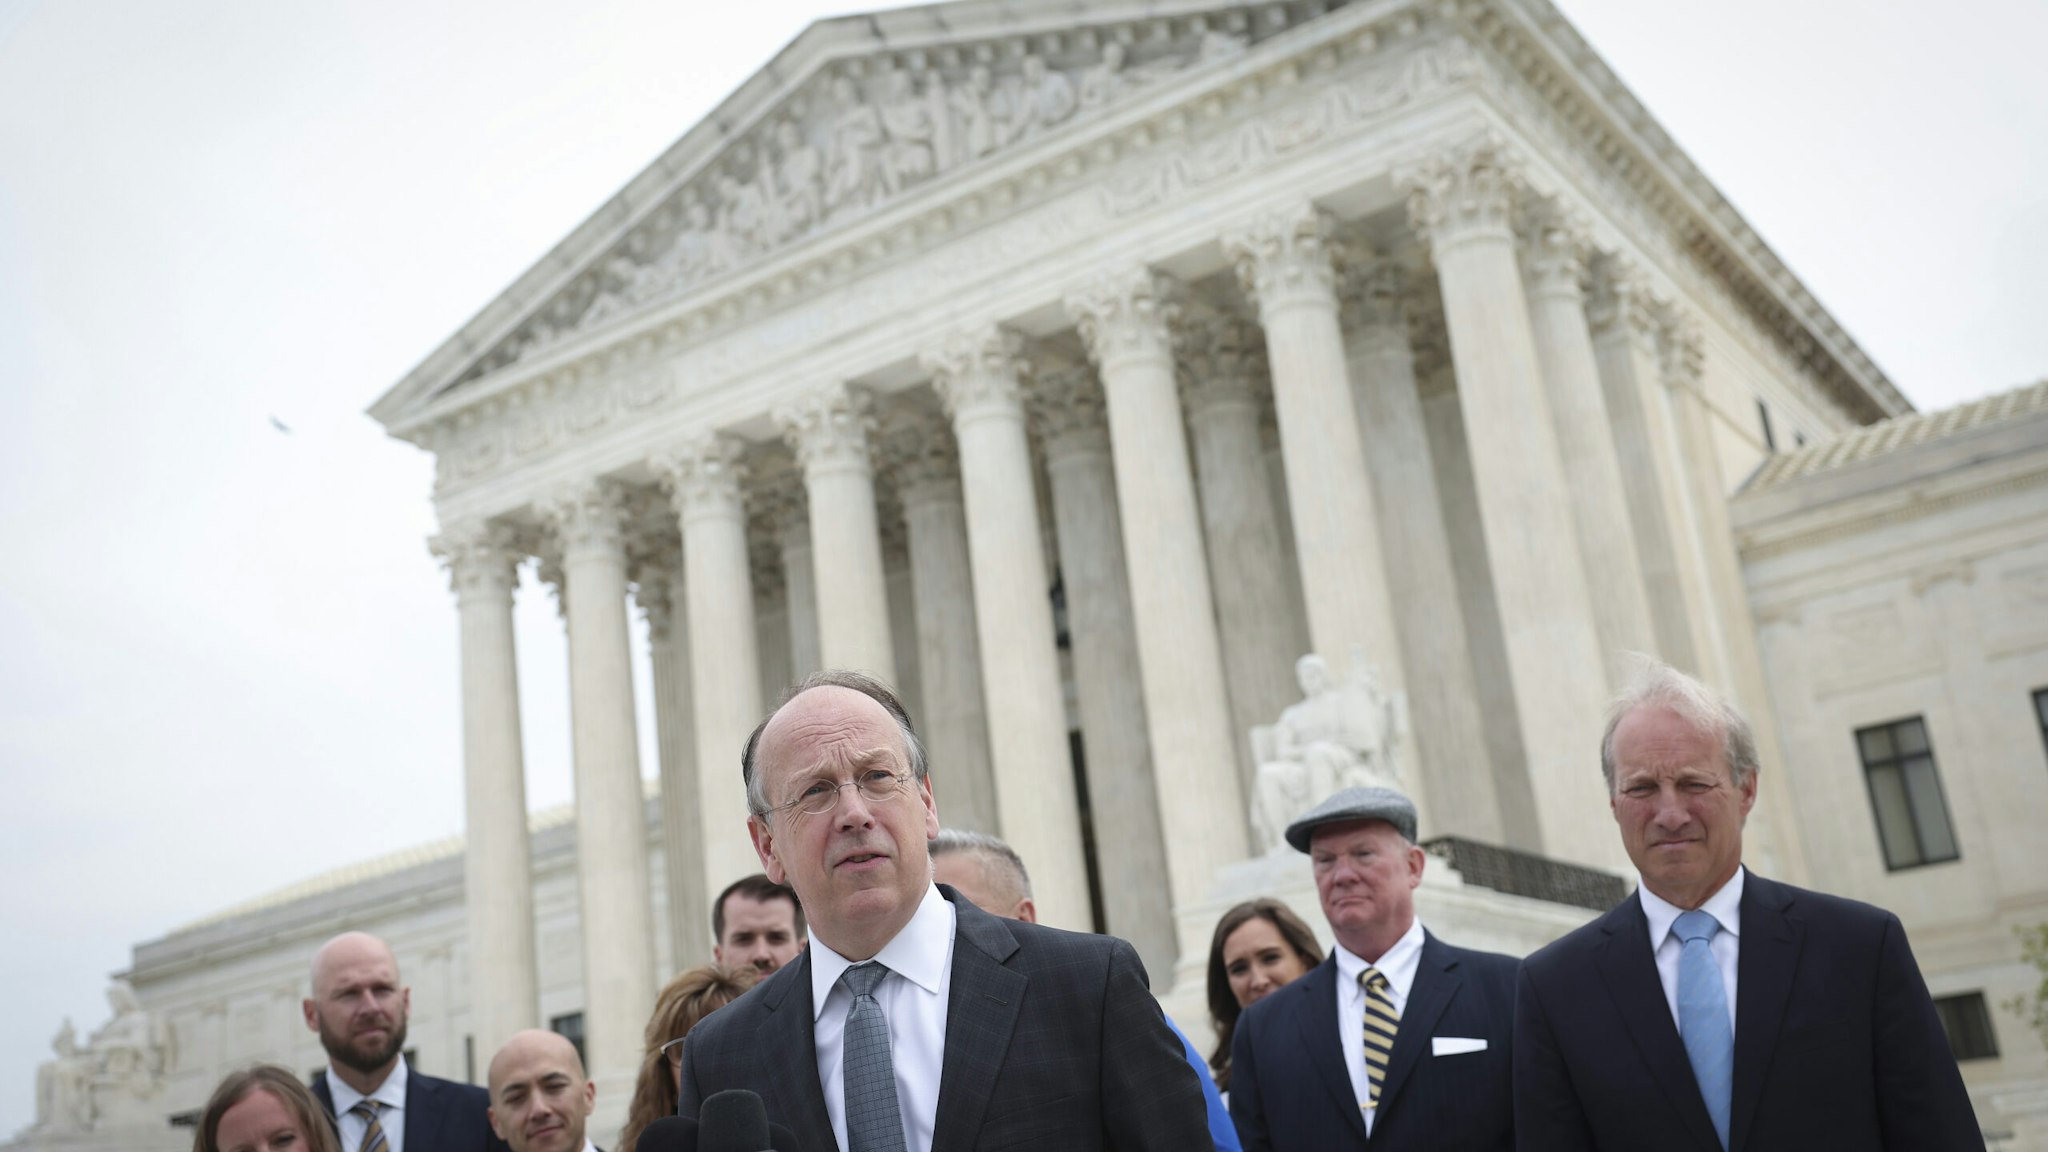 Attorney Paul Clement answers questions outside the U.S. Supreme Court after arguing the case of former Bremerton High School assistant football coach Joe Kennedy on April 25, 2022 in Washington, DC. Kennedy was terminated from his job by Bremerton public school officials in 2015 after refusing to stop his on-field prayers after football games.